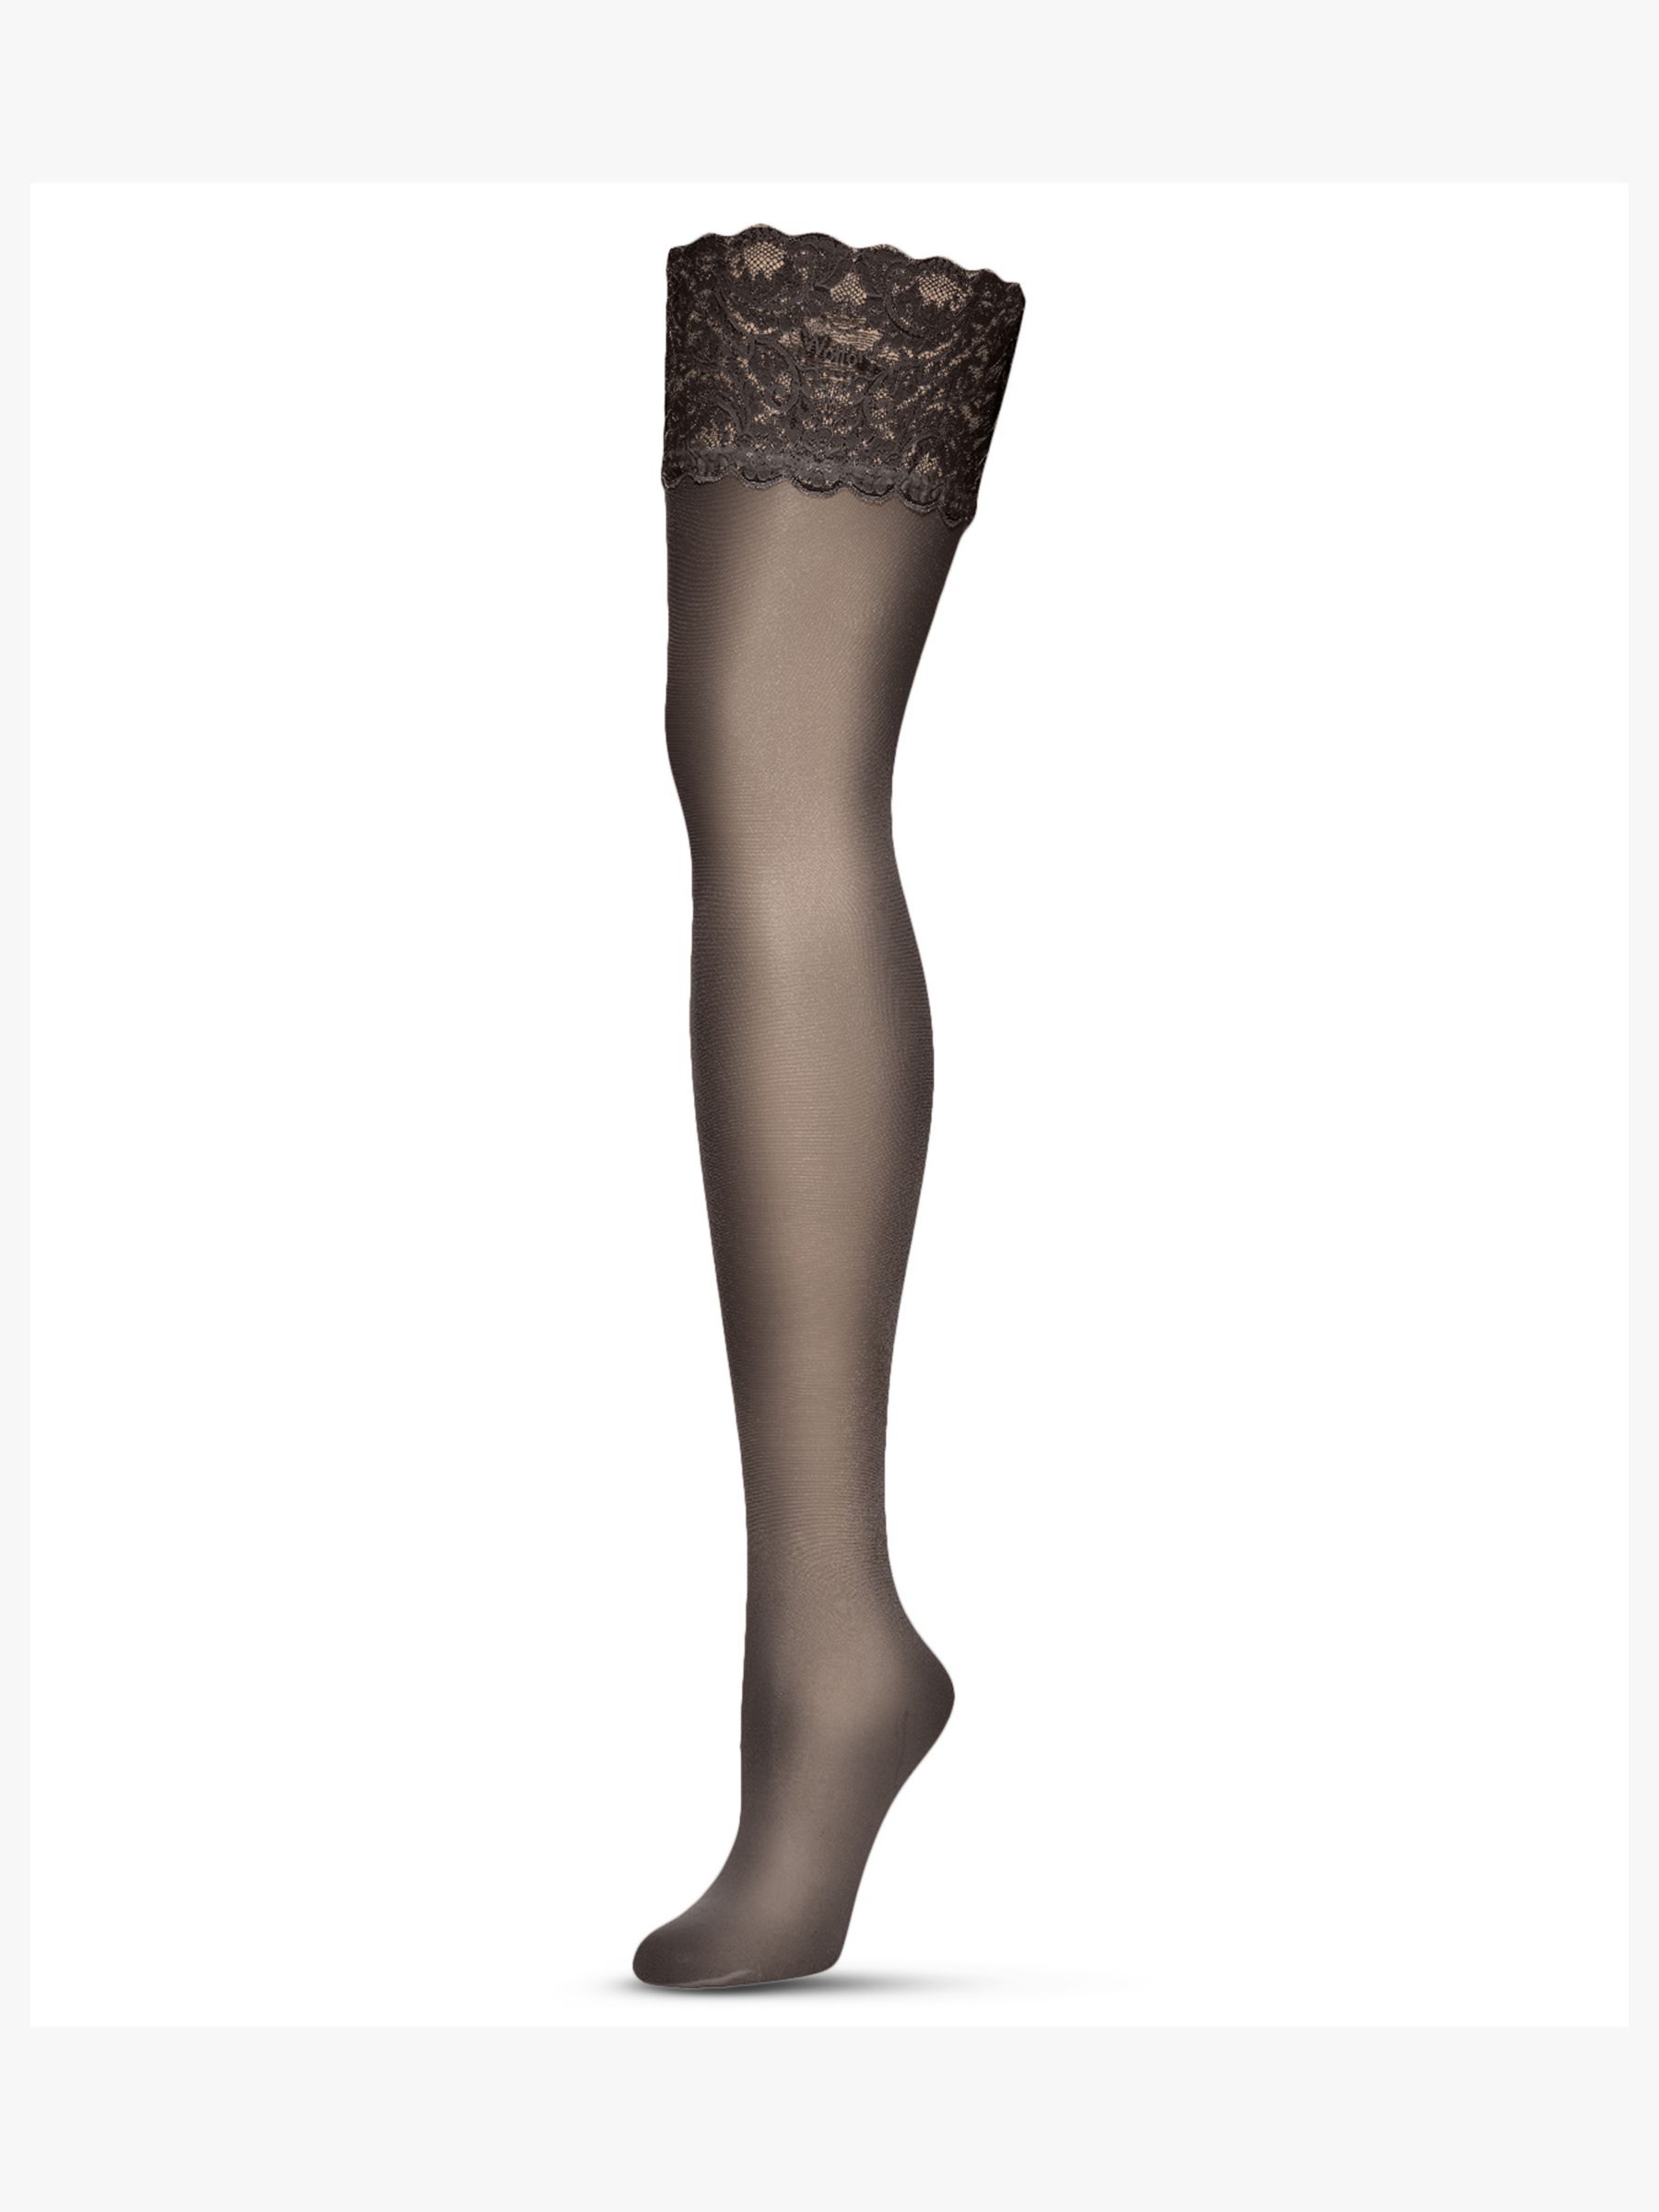 Wolford Satin Touch 20 Denier Stay Ups, Nearly Black, S